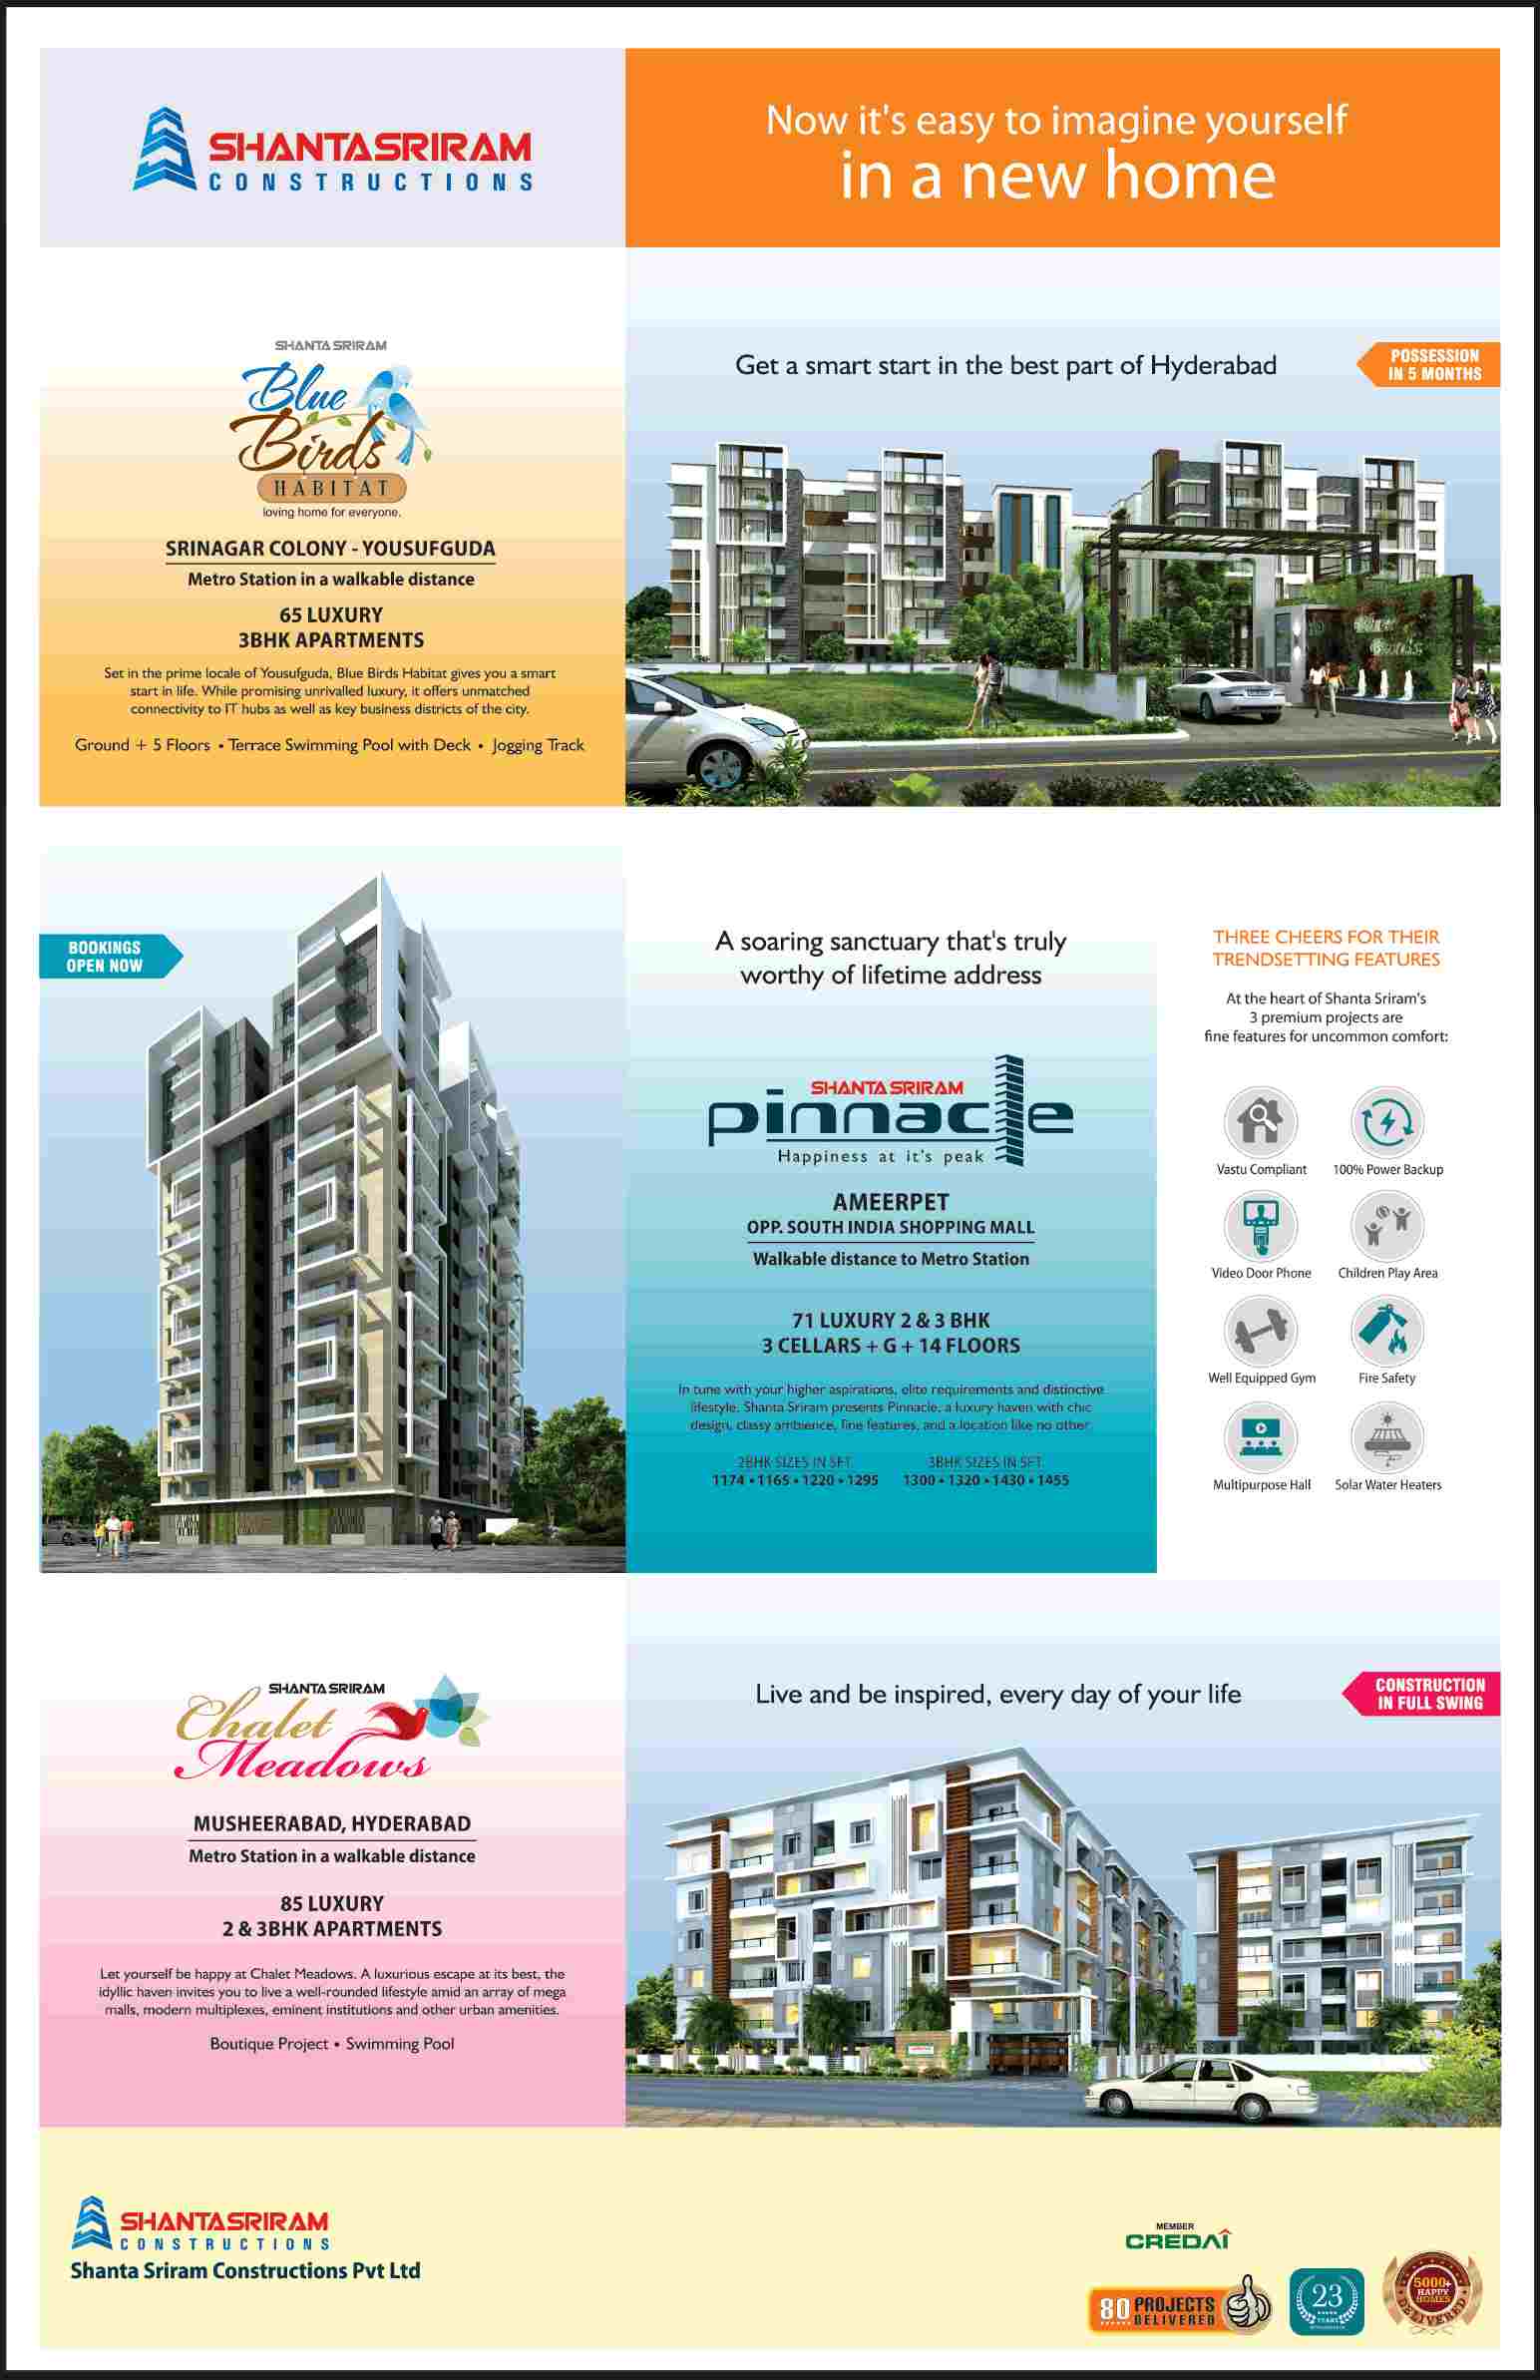 Imagine yourself in a new home by investing at Shanta Sriram Properties in Hyderabad Update